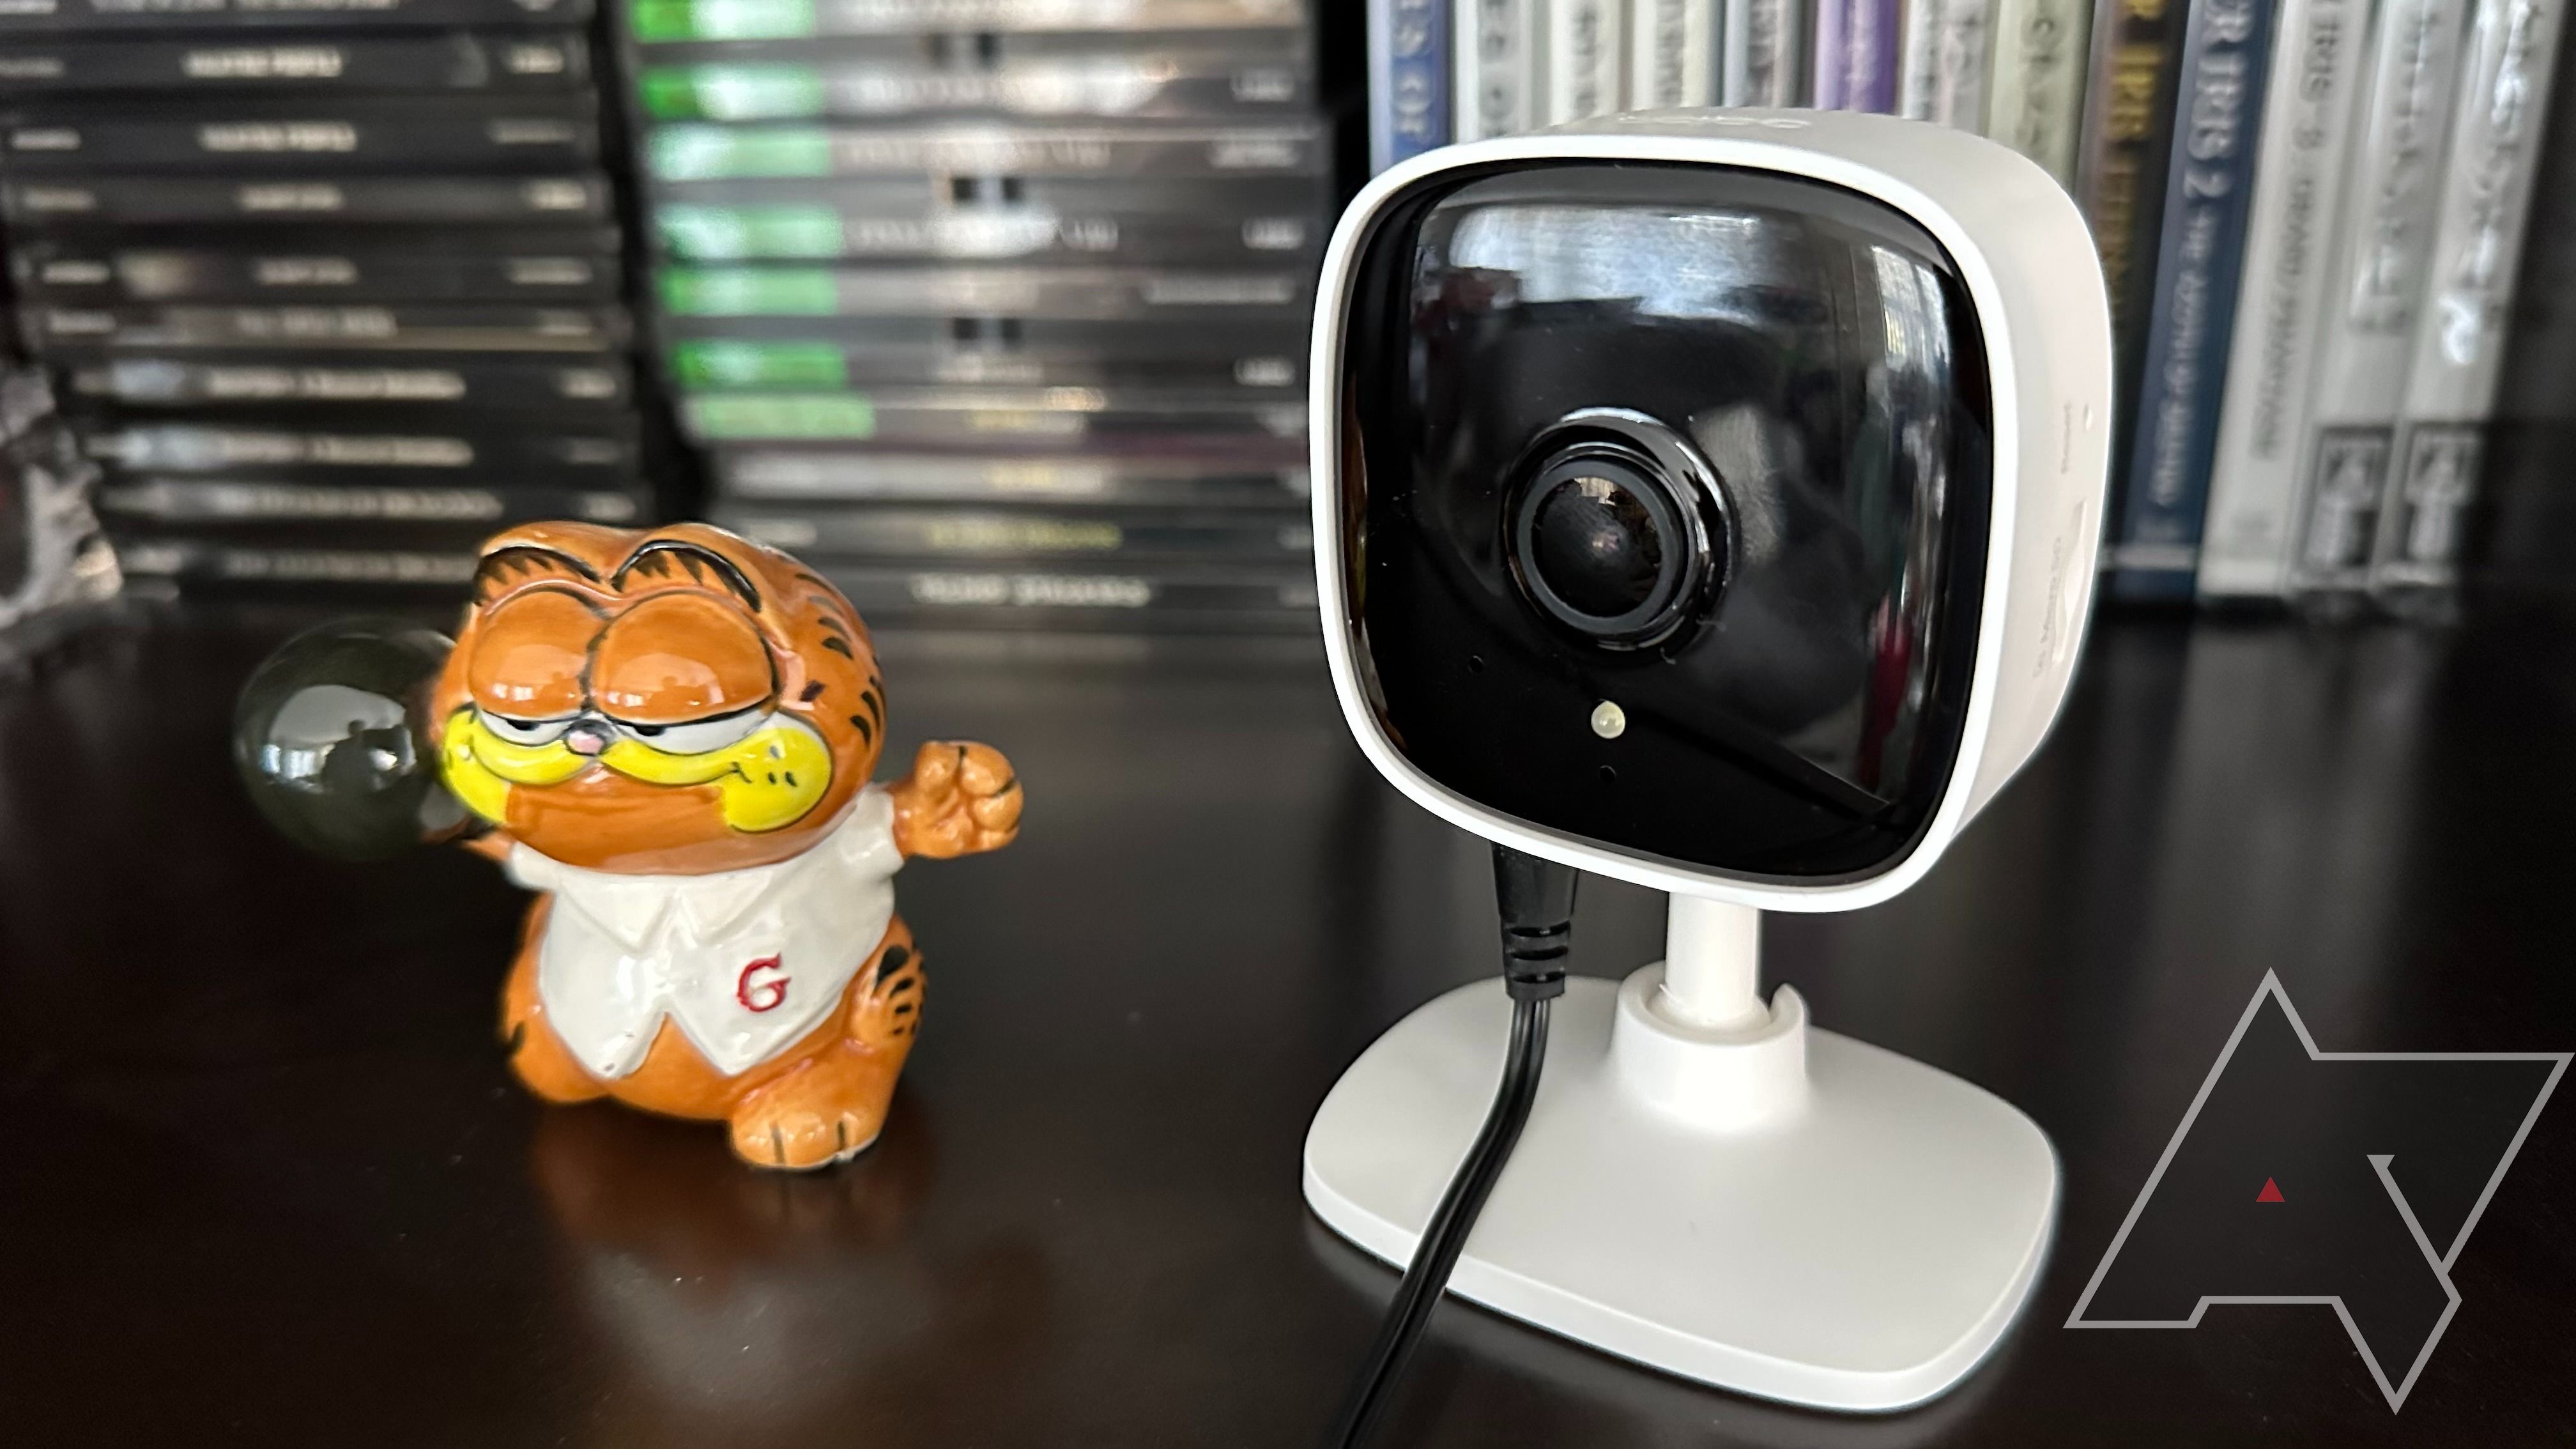 TP-Link Tapo C100 Wi-Fi camera review 